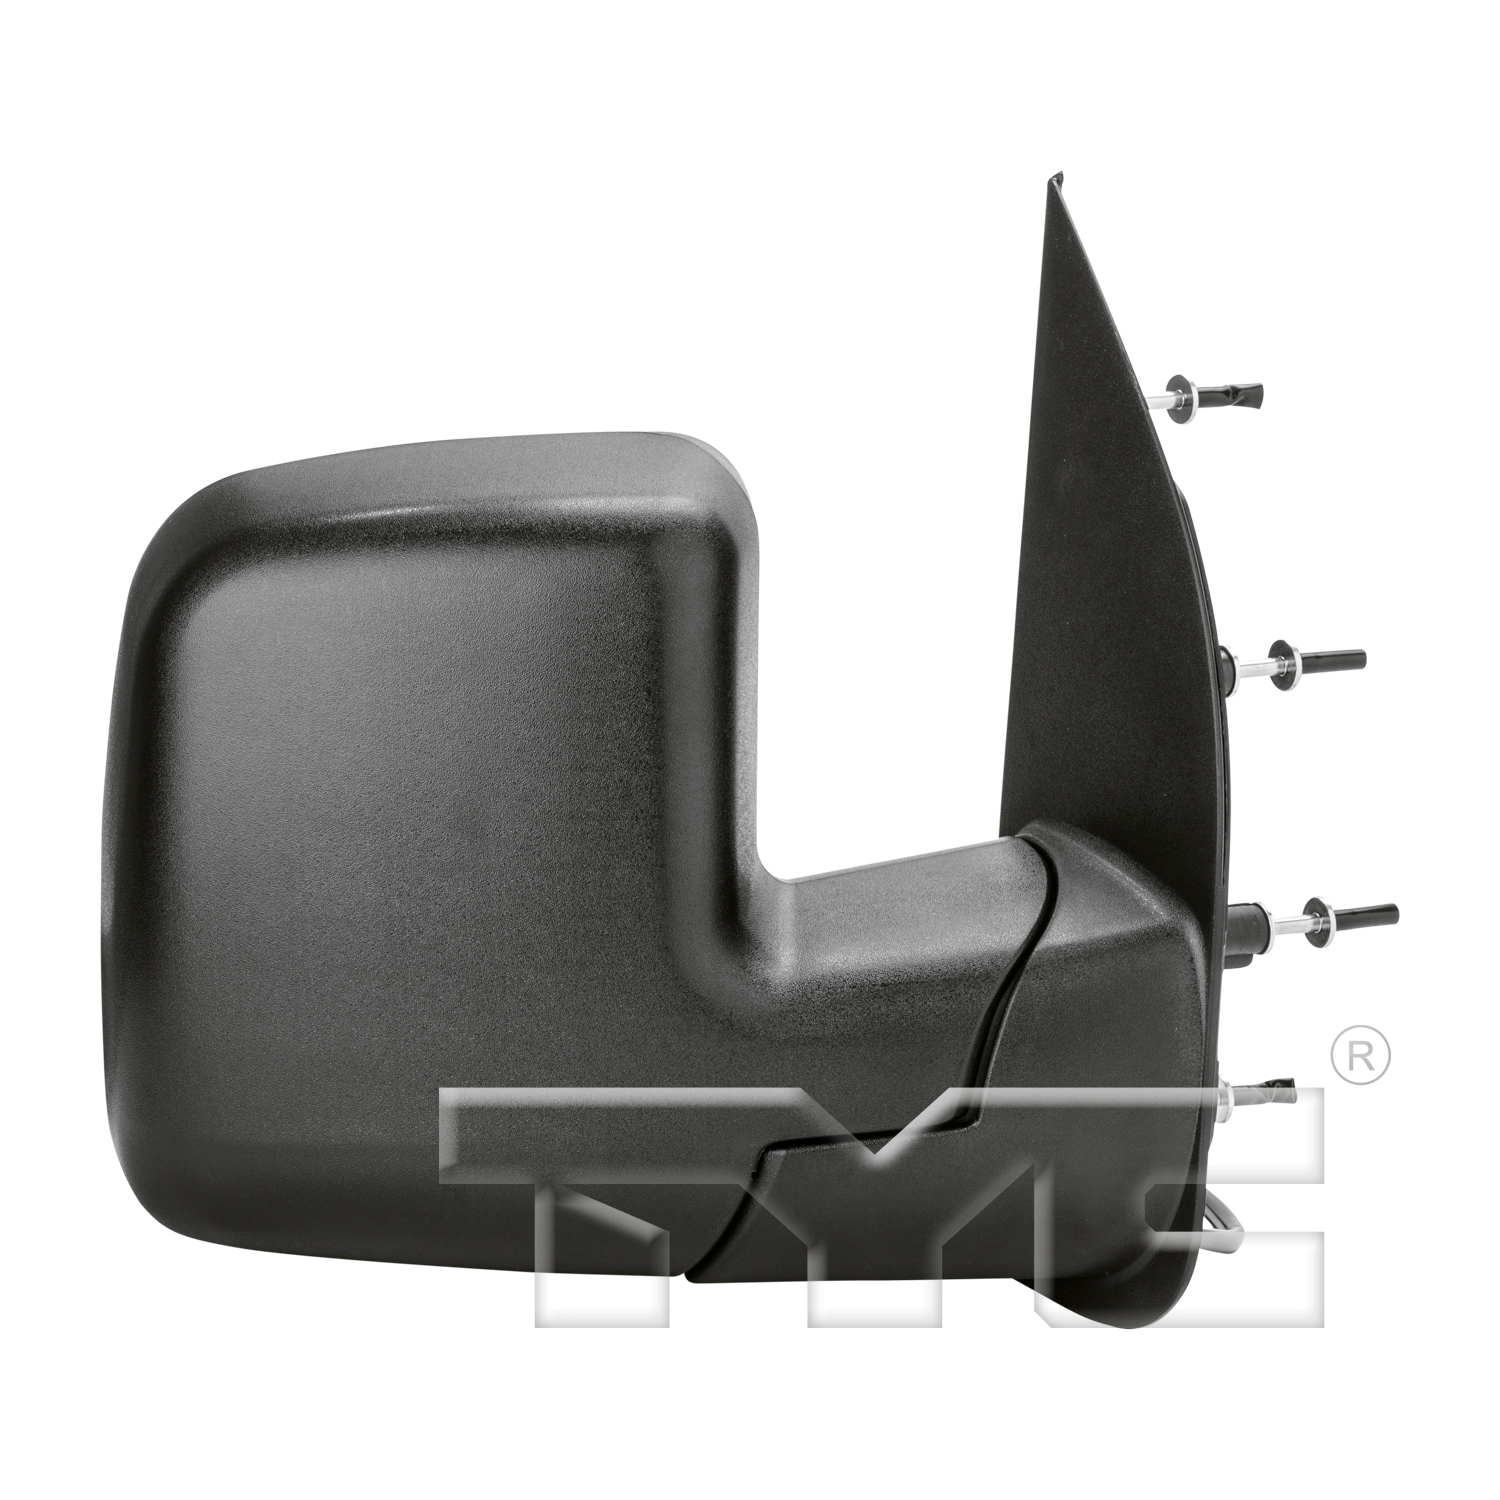 Aftermarket MIRRORS for FORD - E-250, E-250,03-06,RT Mirror outside rear view